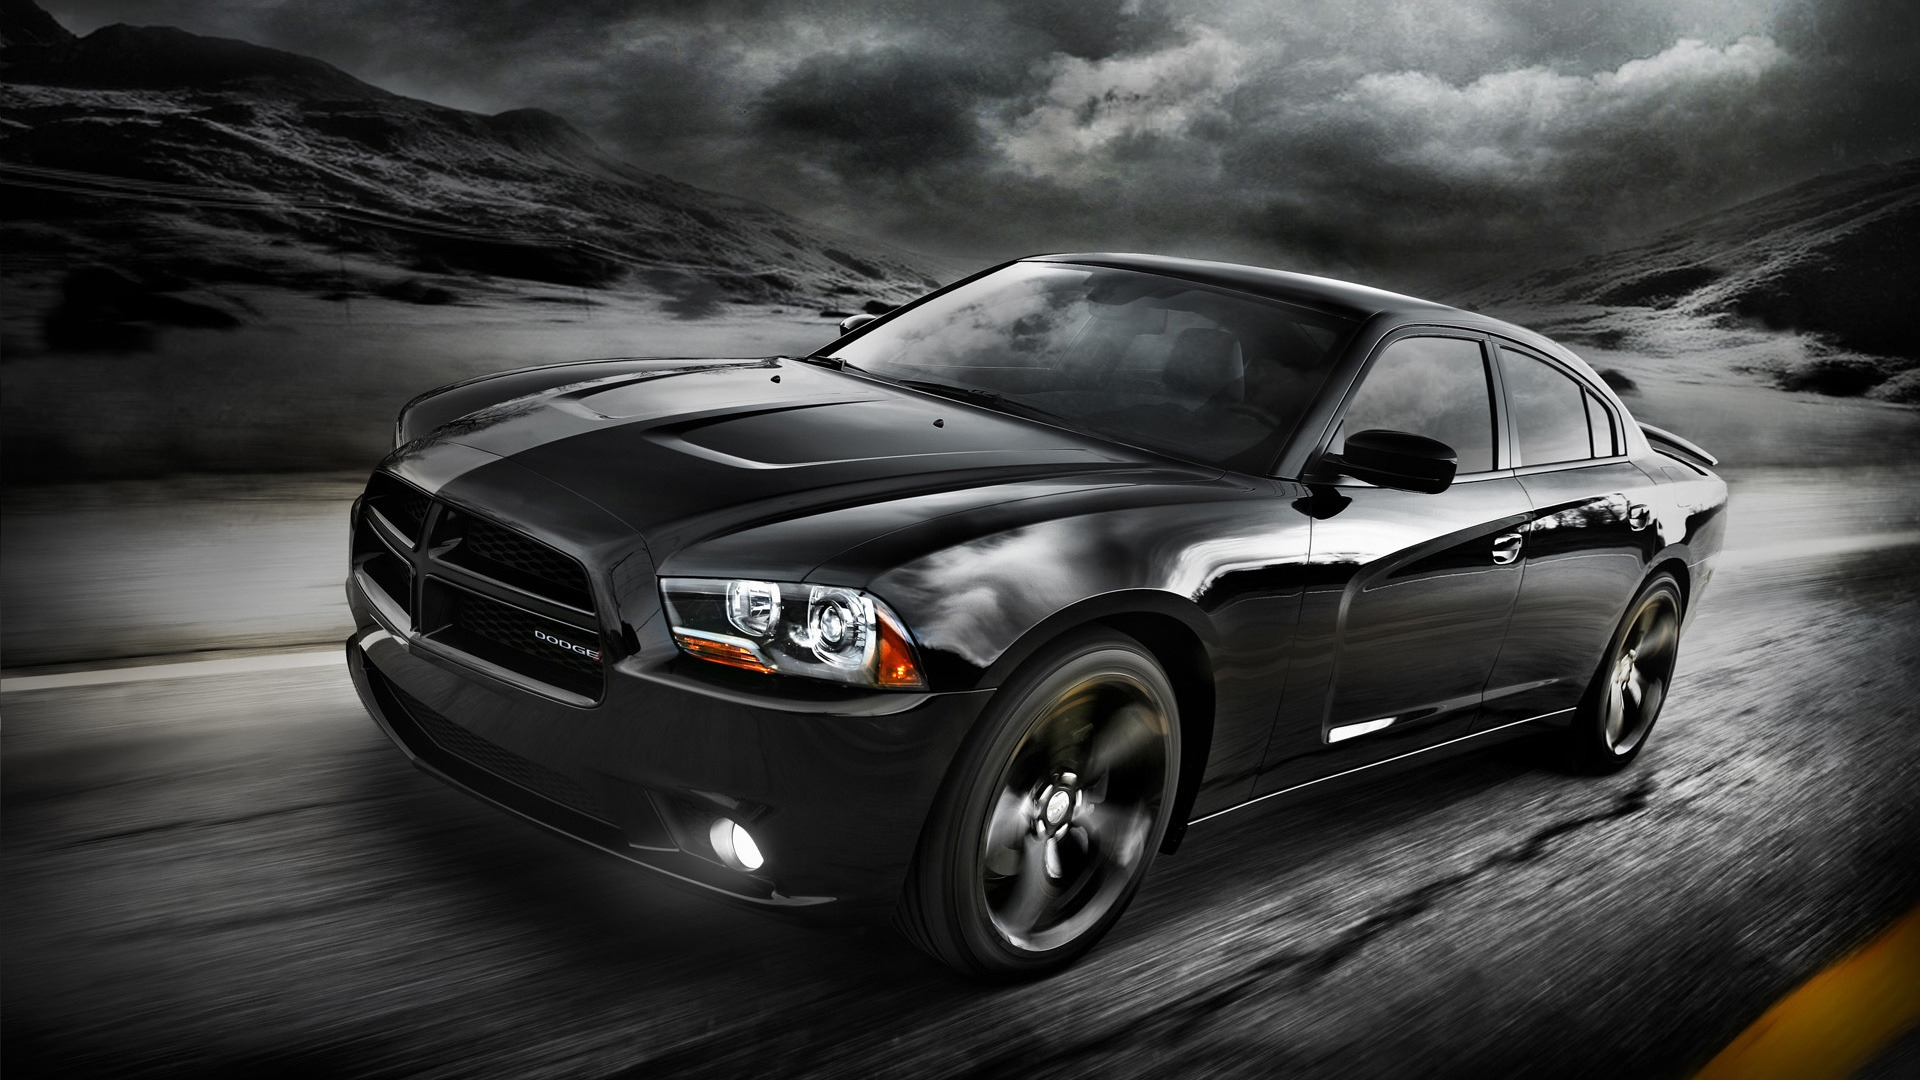 Dodge Charger Blacktop 2012 for 1920 x 1080 HDTV 1080p resolution